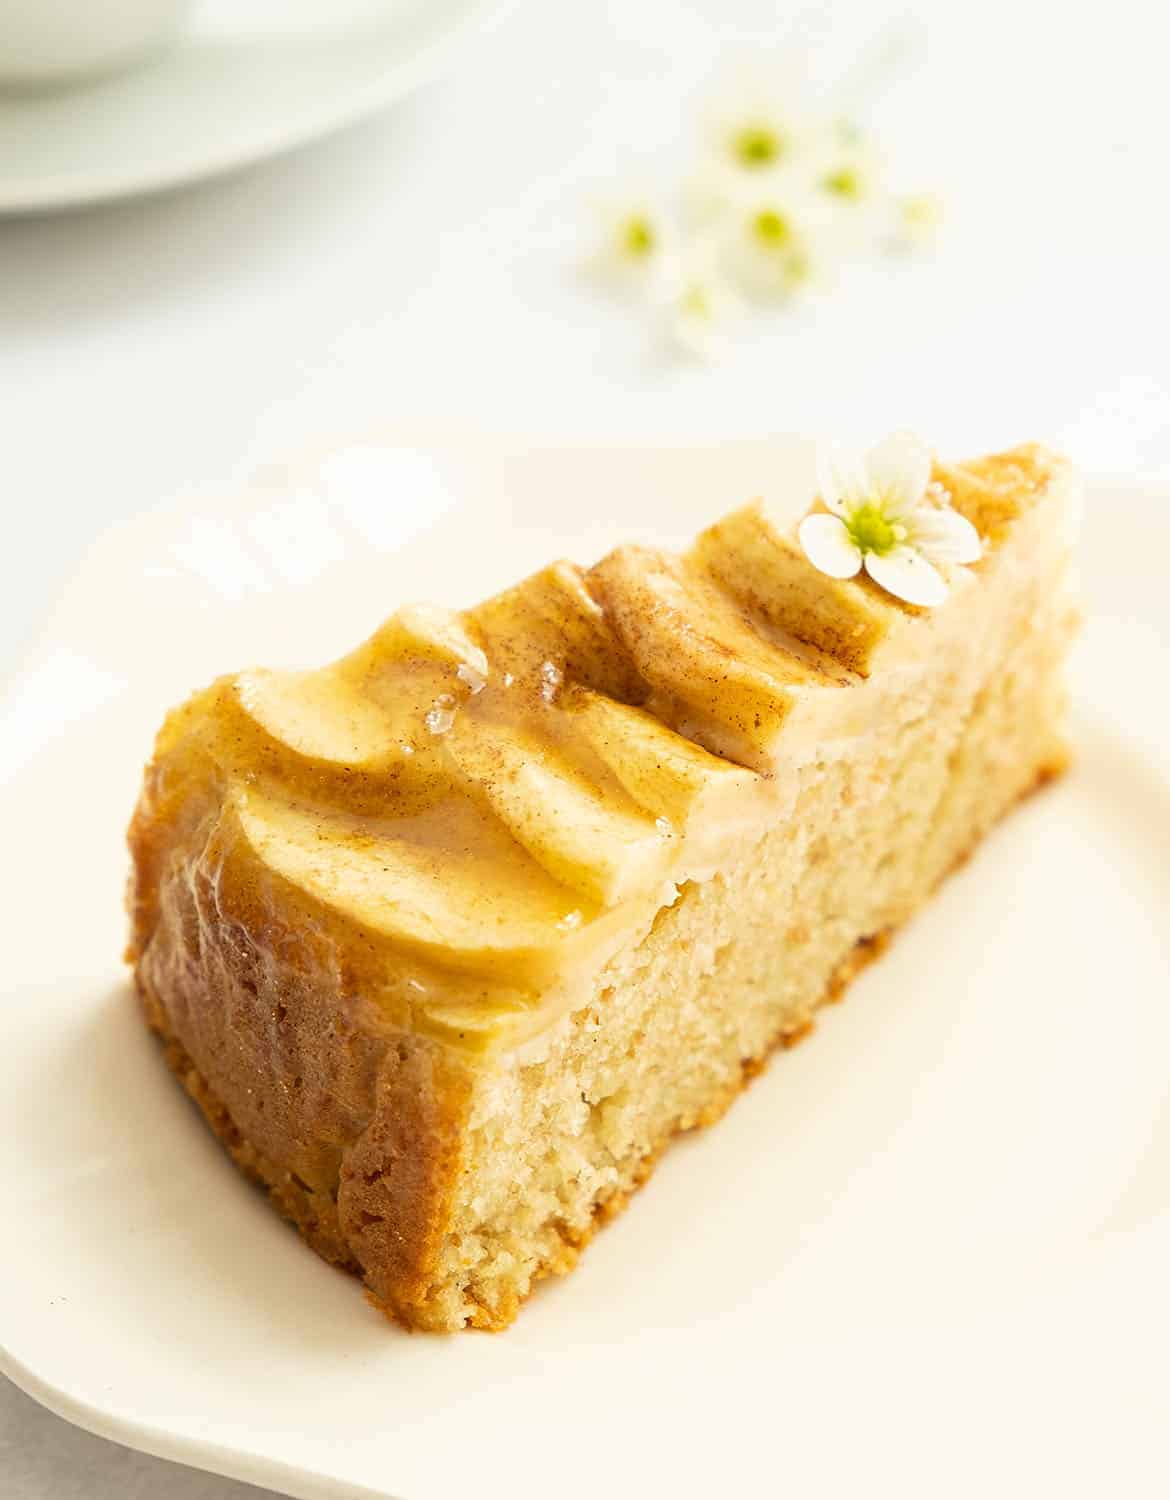 A slice of apple cake decorated with a small white flower on a white plate.